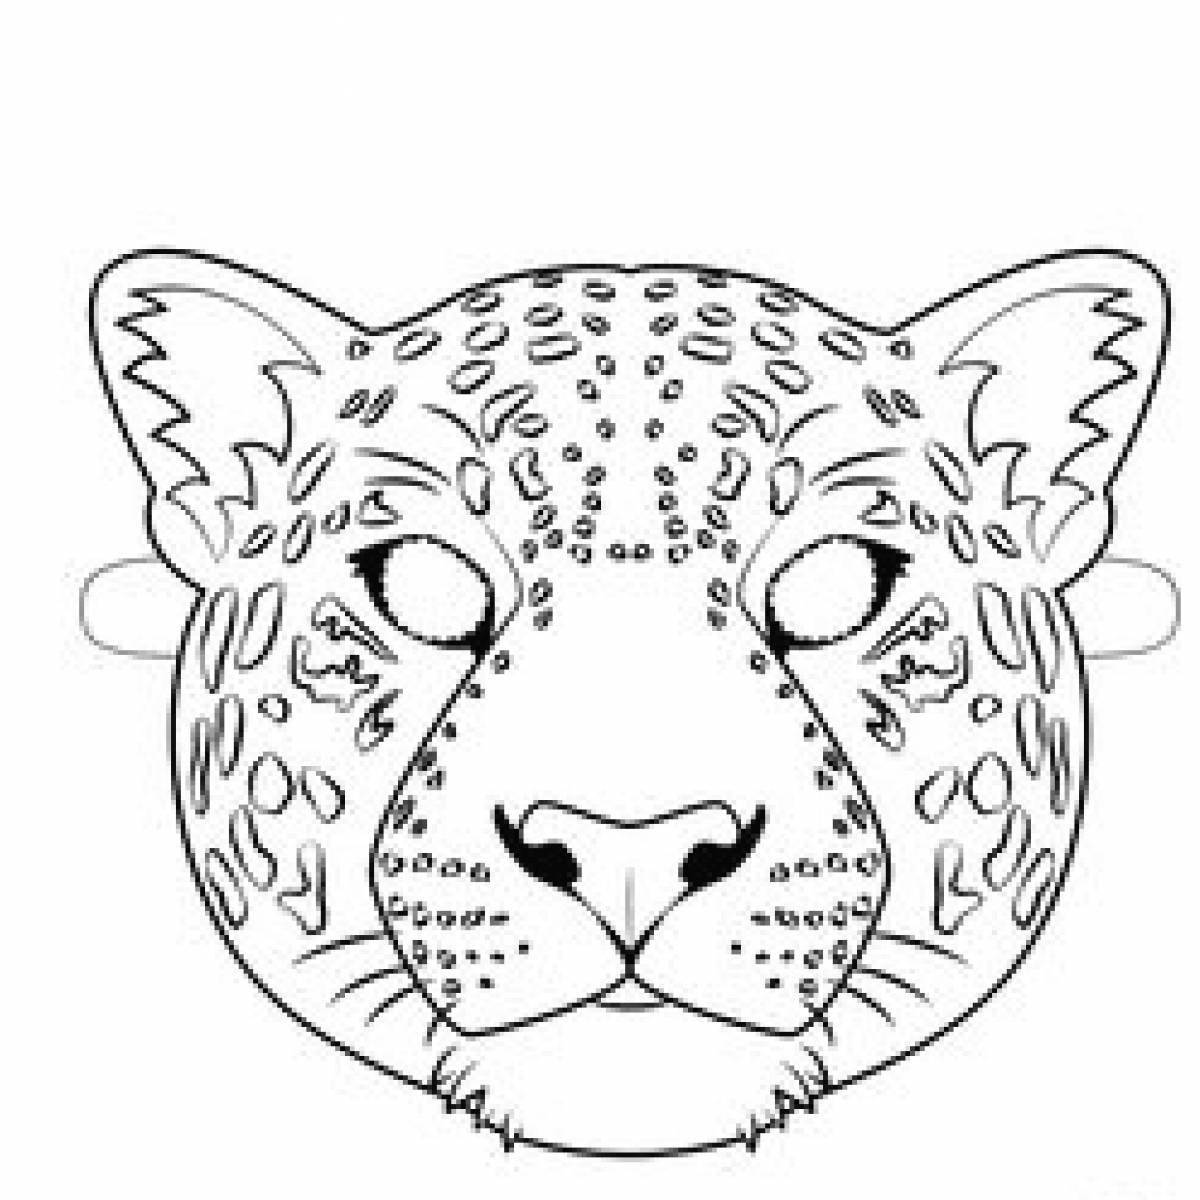 Vibrant animal coloring page